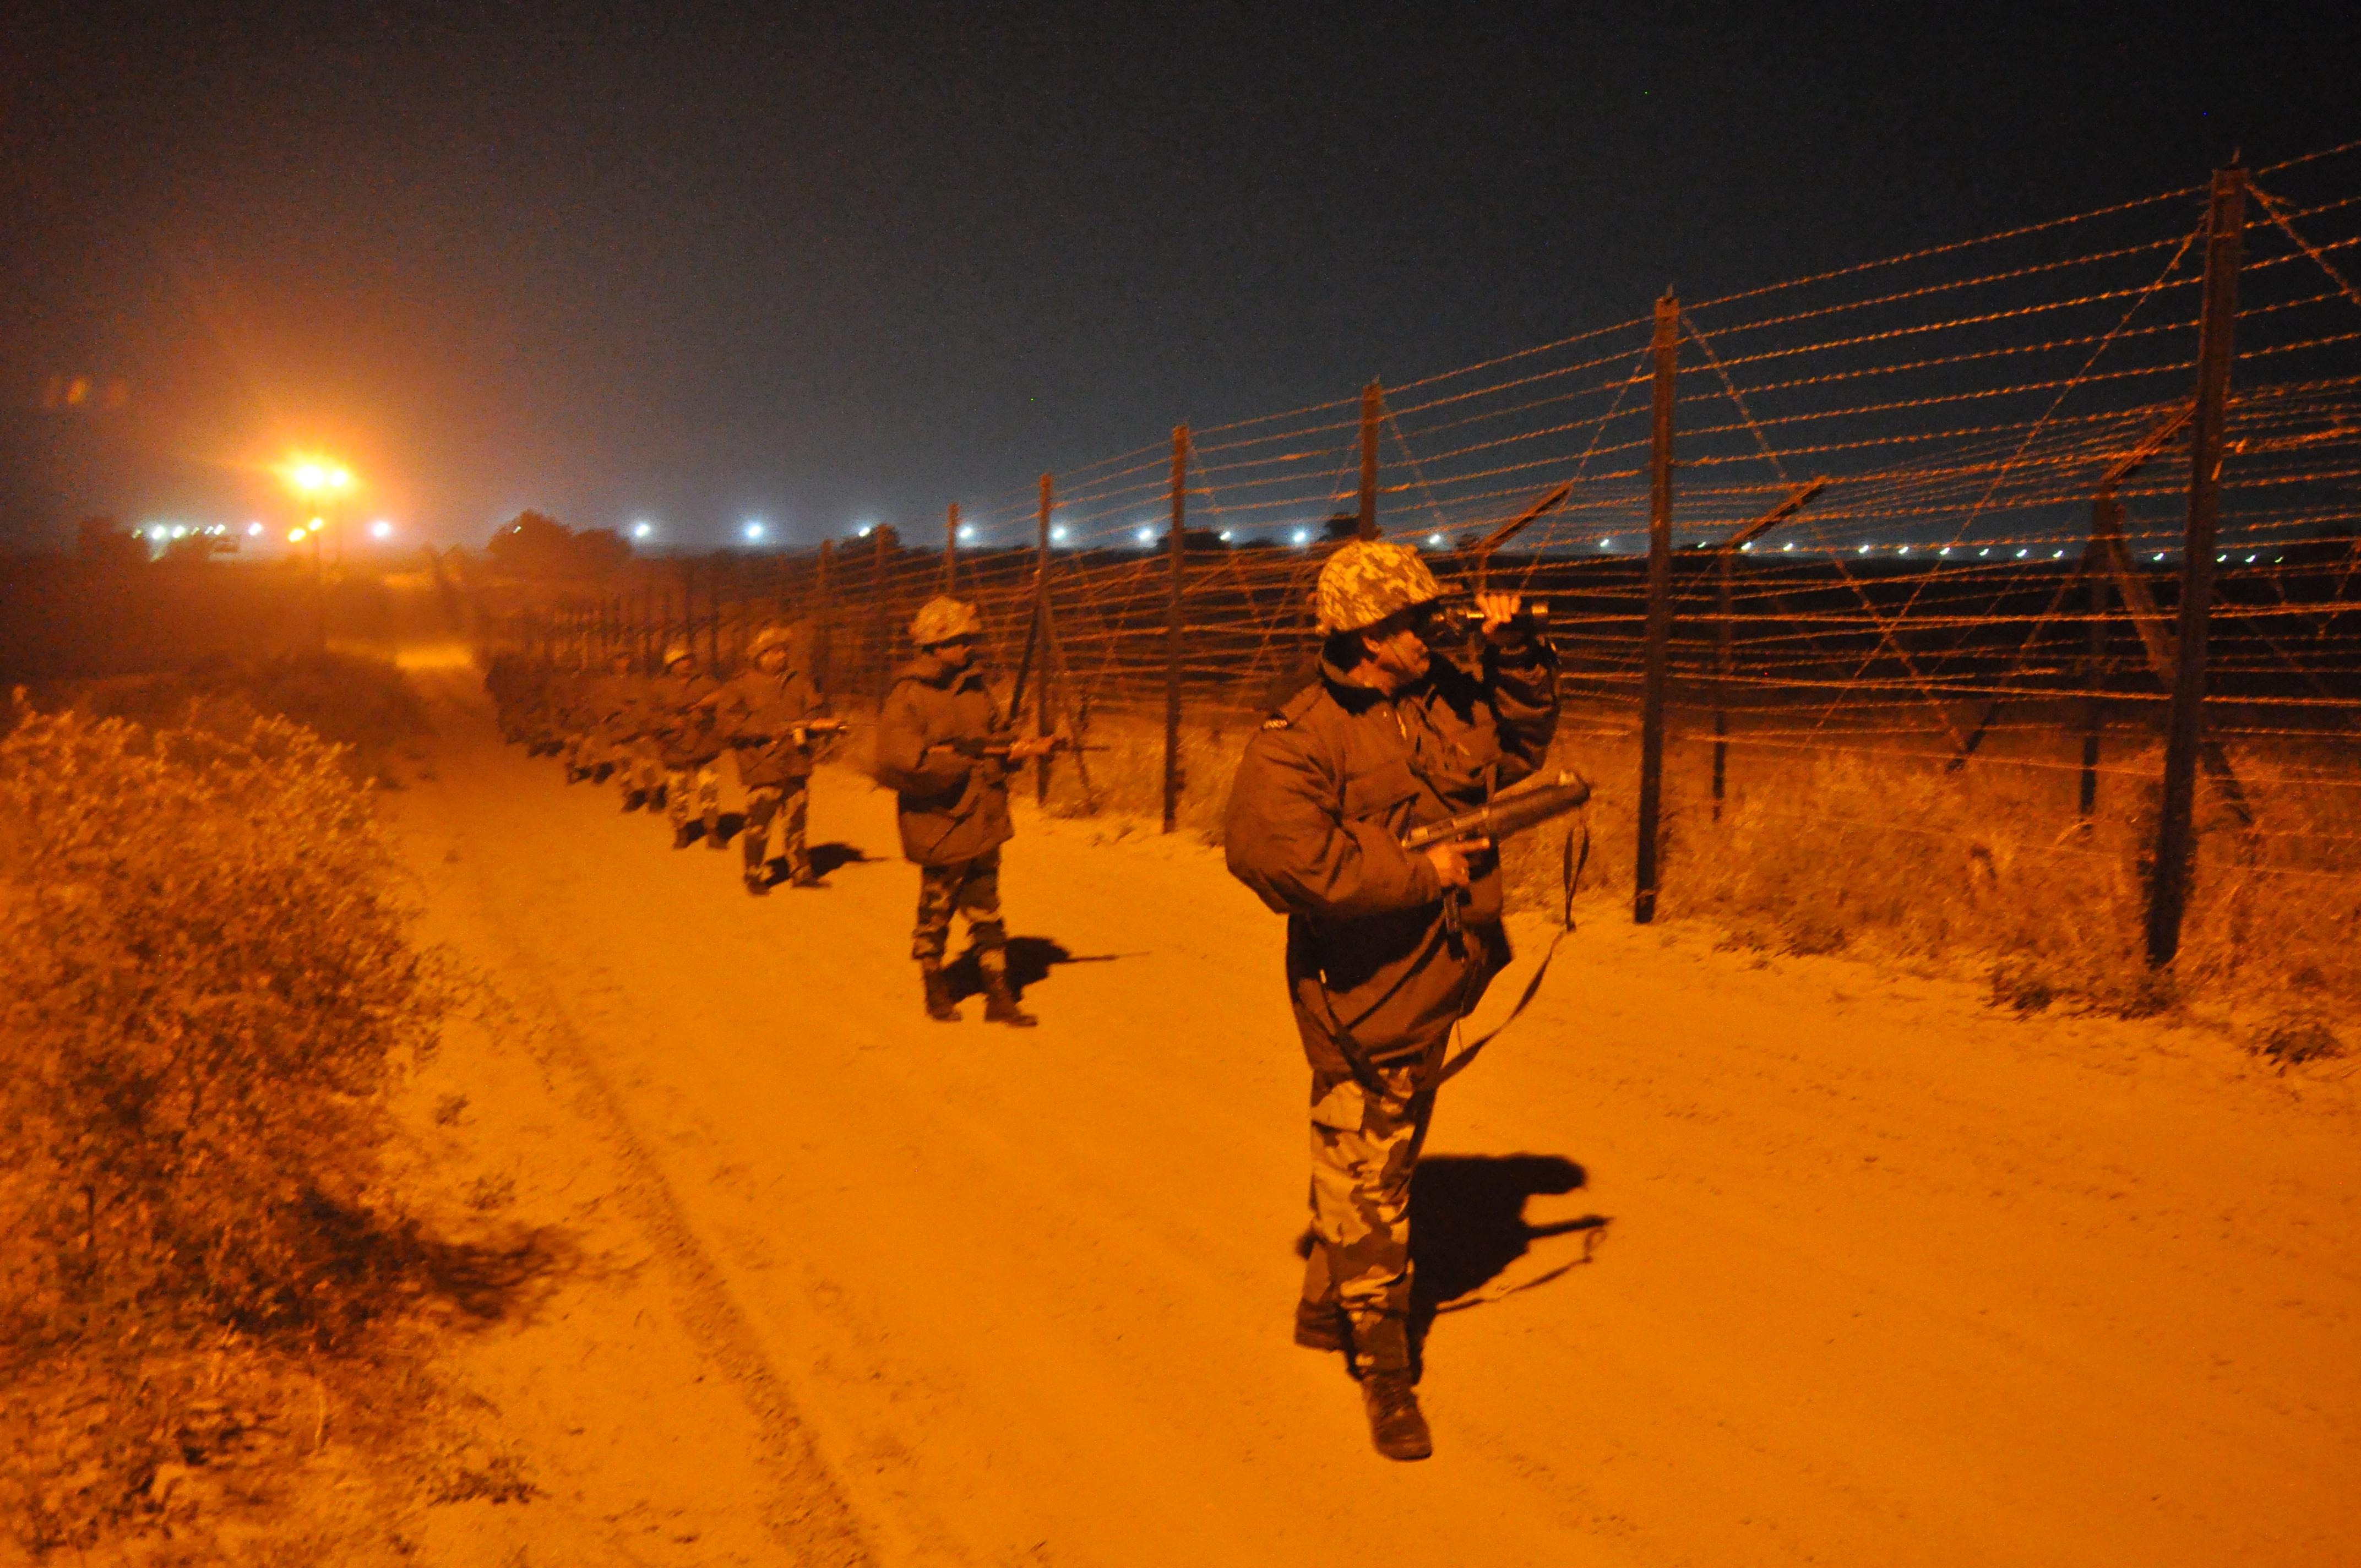 Jawans keep an eye on every movement in - 2 degree temperature